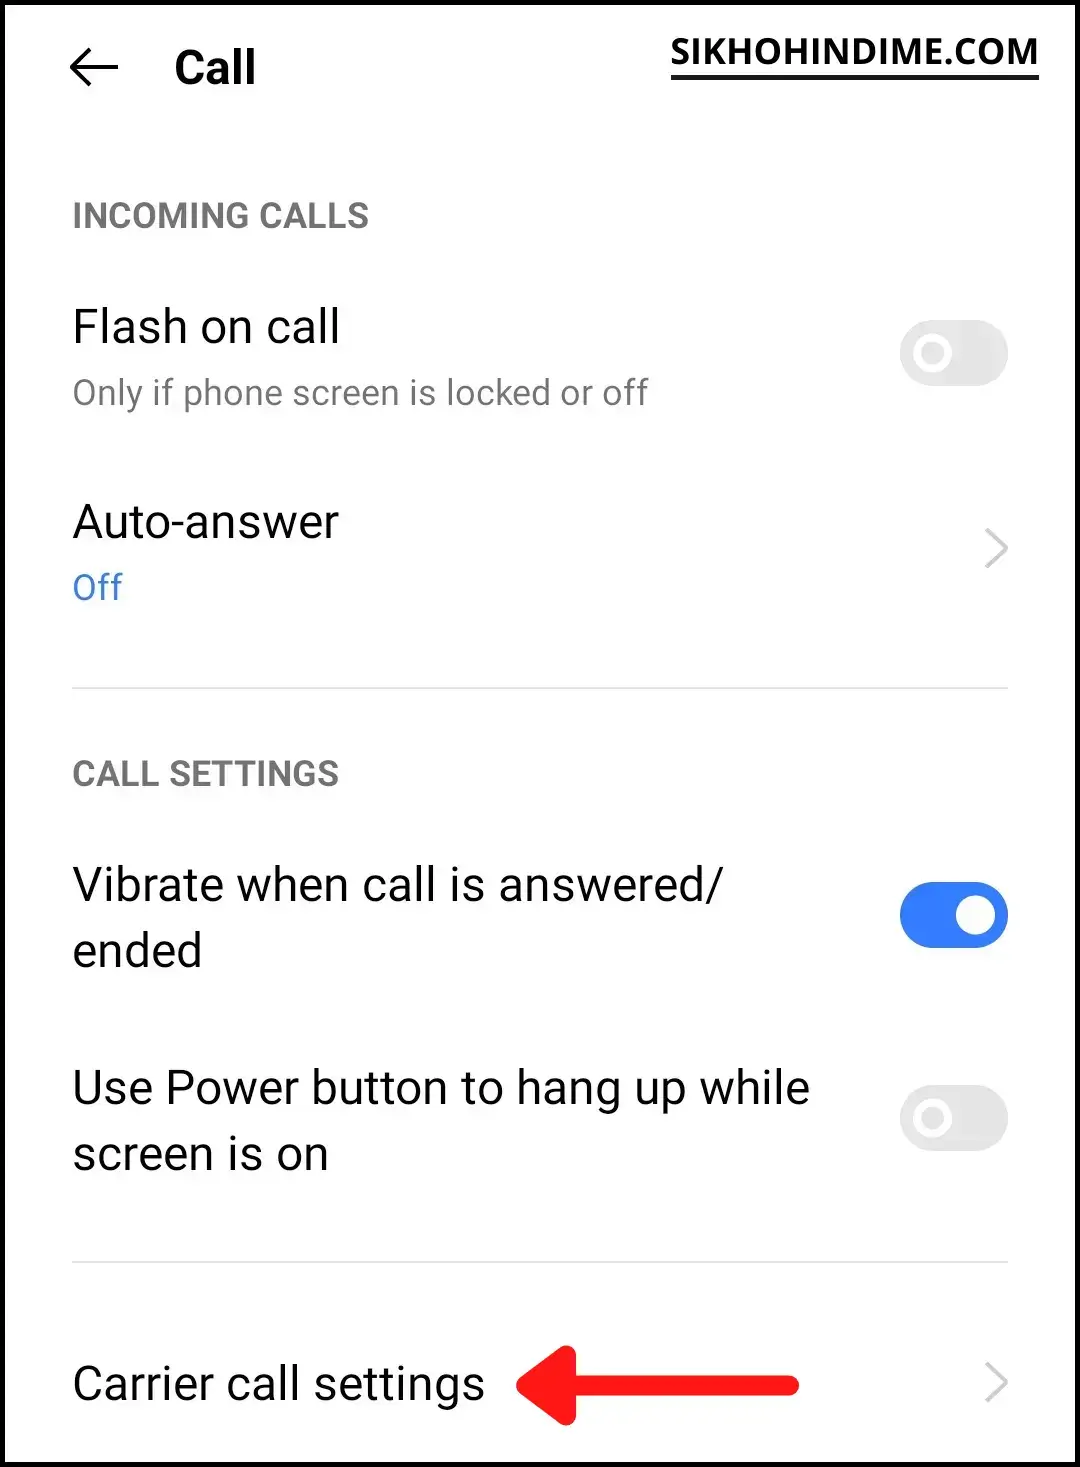 Click on carrier call settings